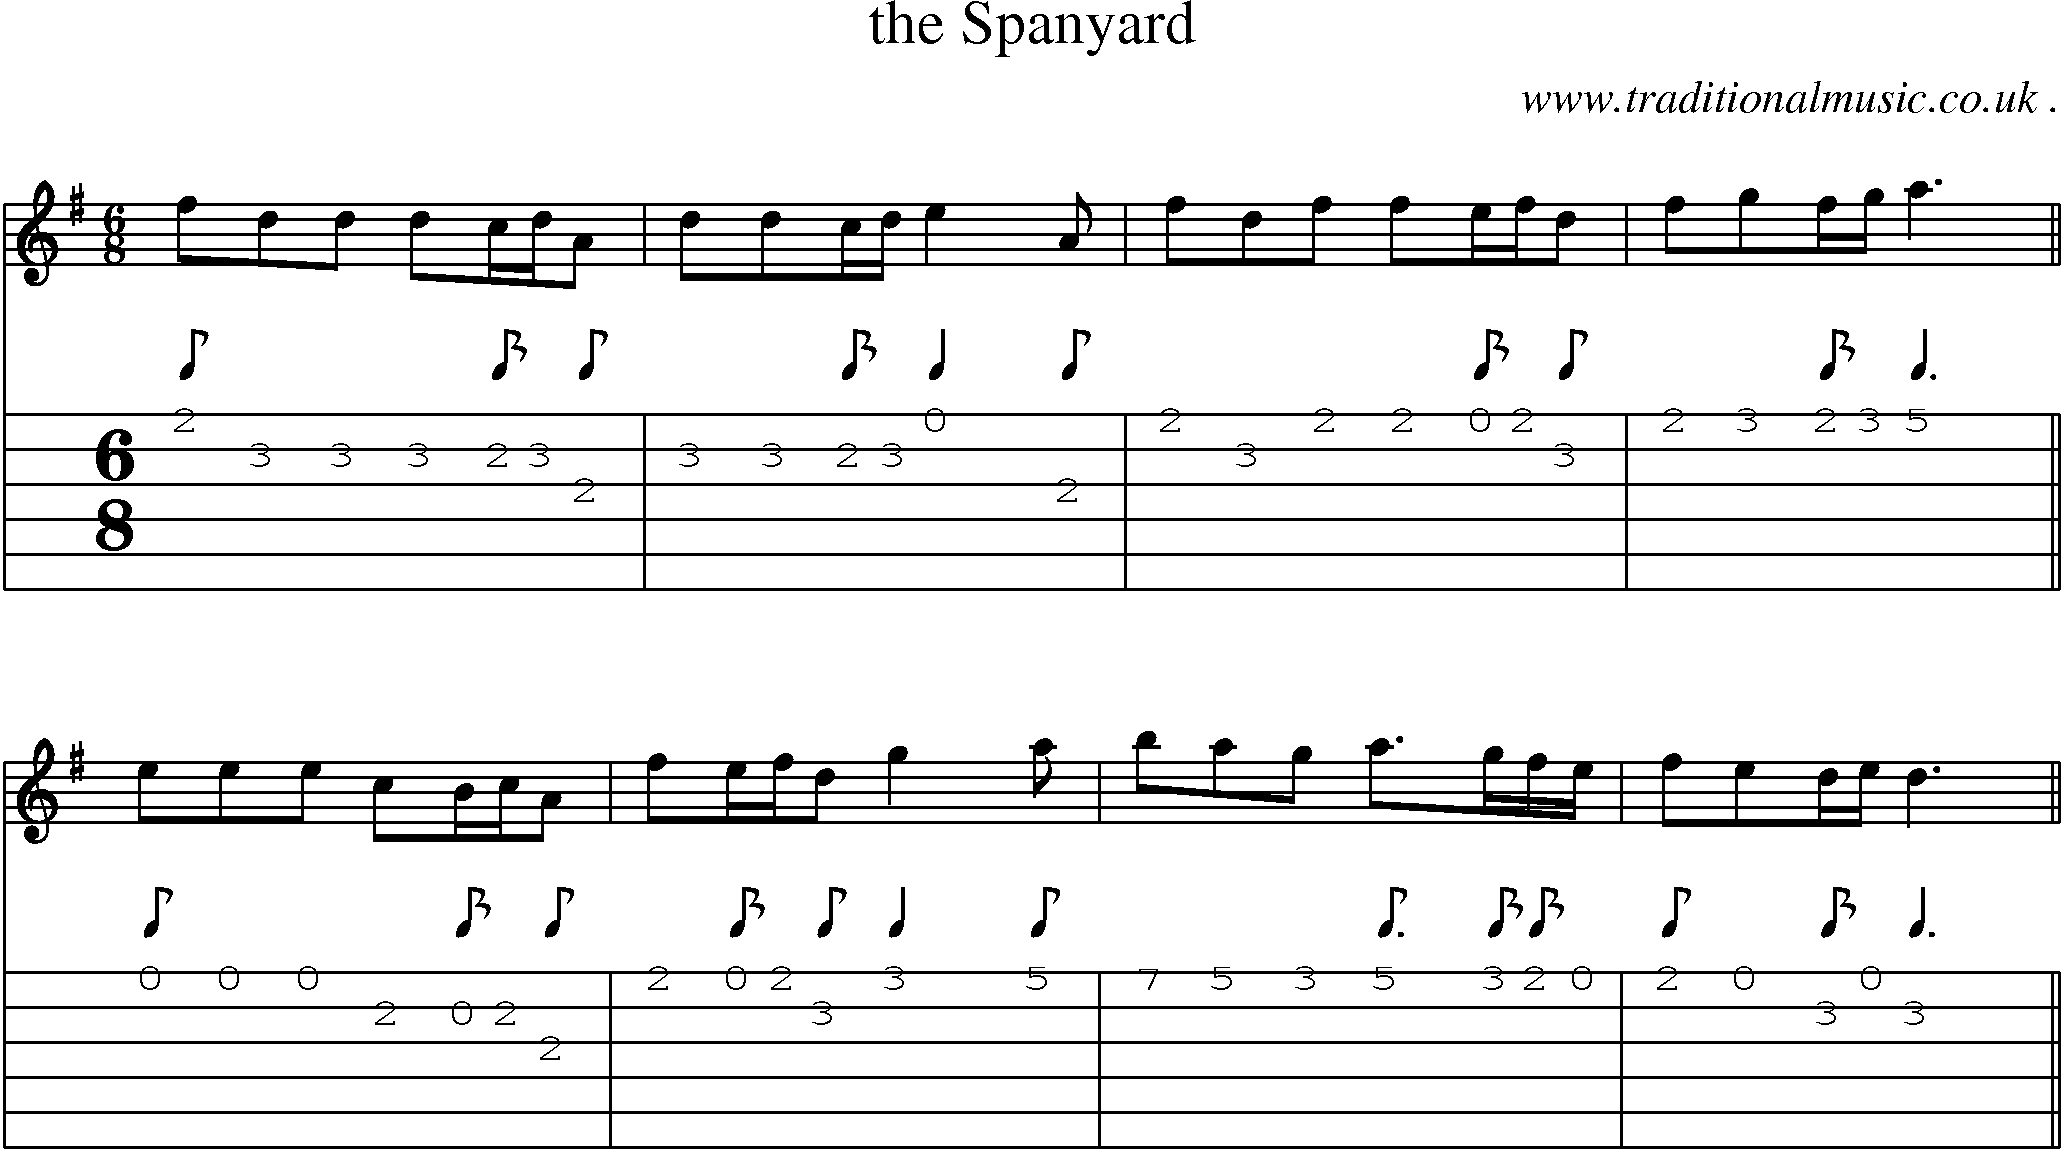 Sheet-music  score, Chords and Guitar Tabs for The Spanyard